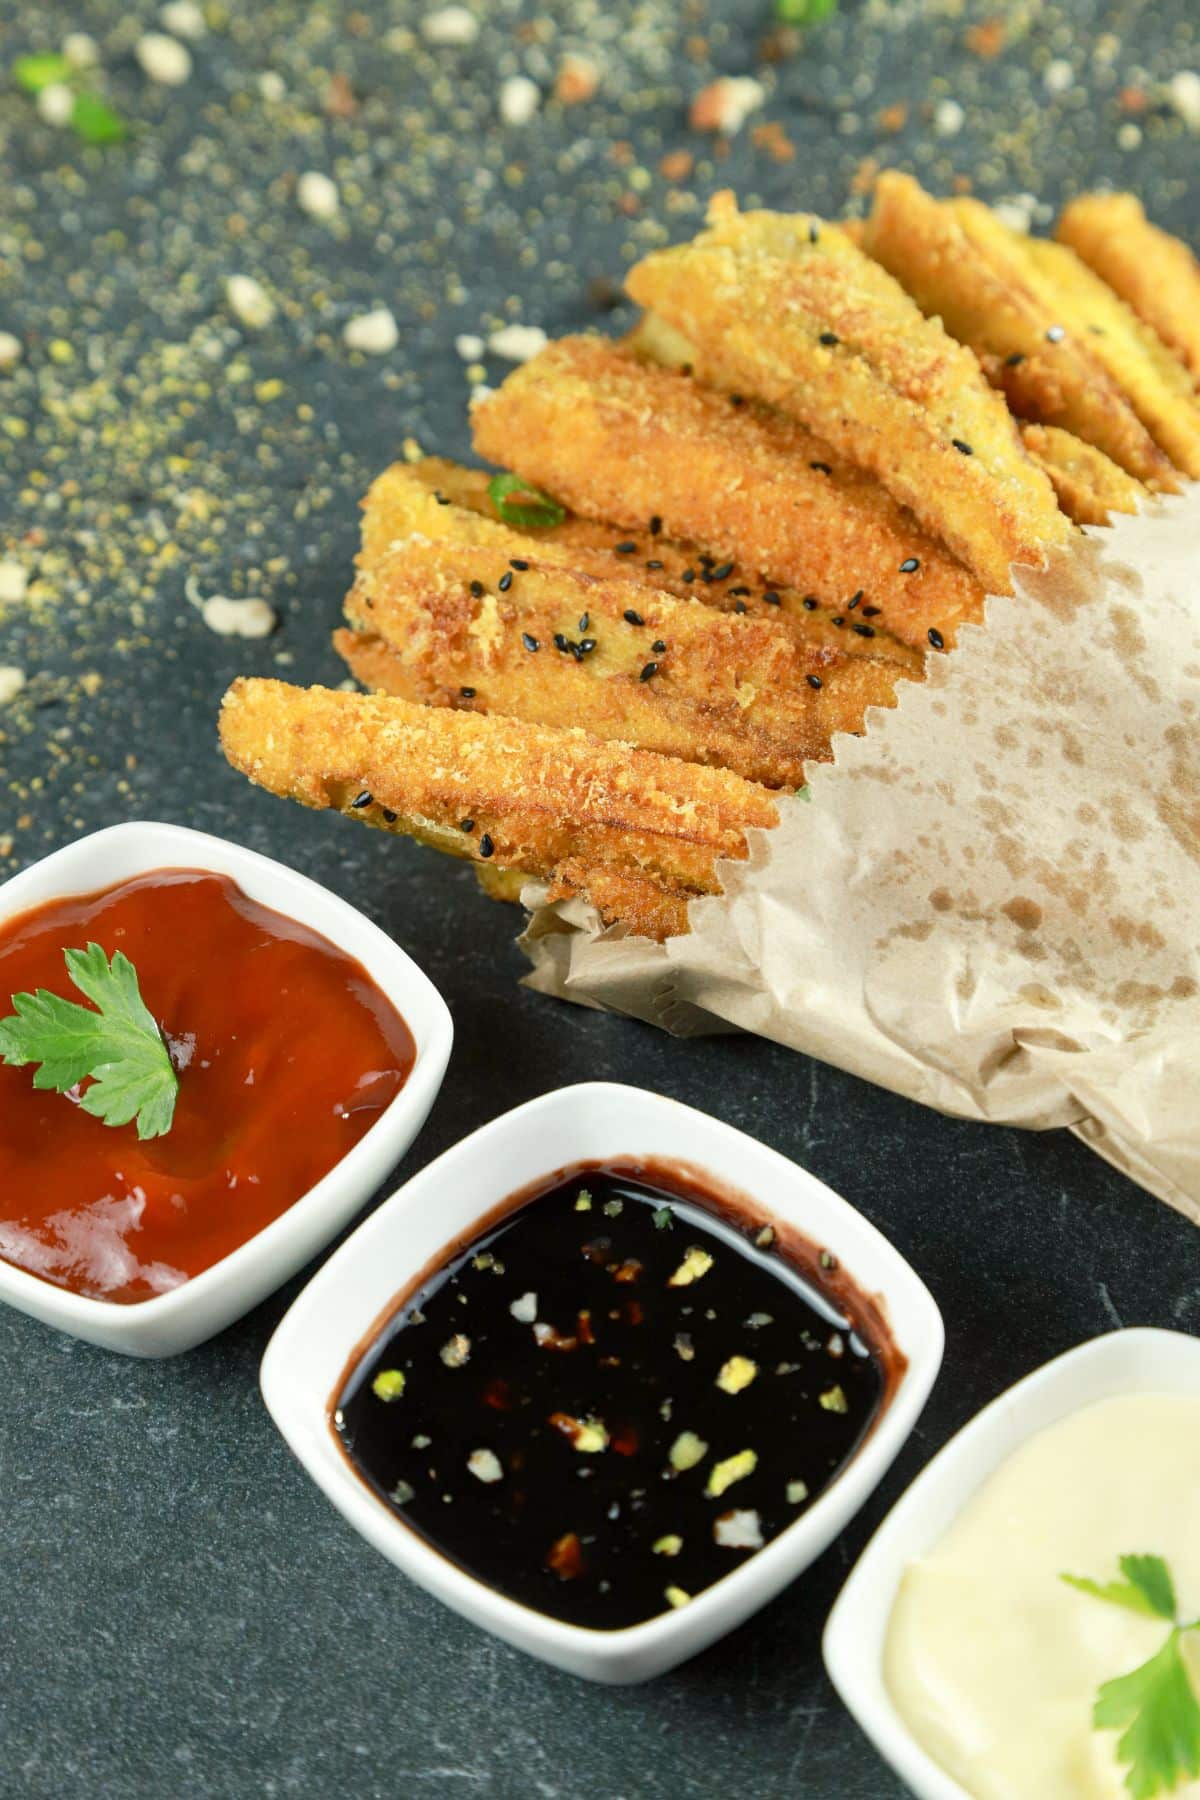 eggplant fries in paper next to bowl of sauce